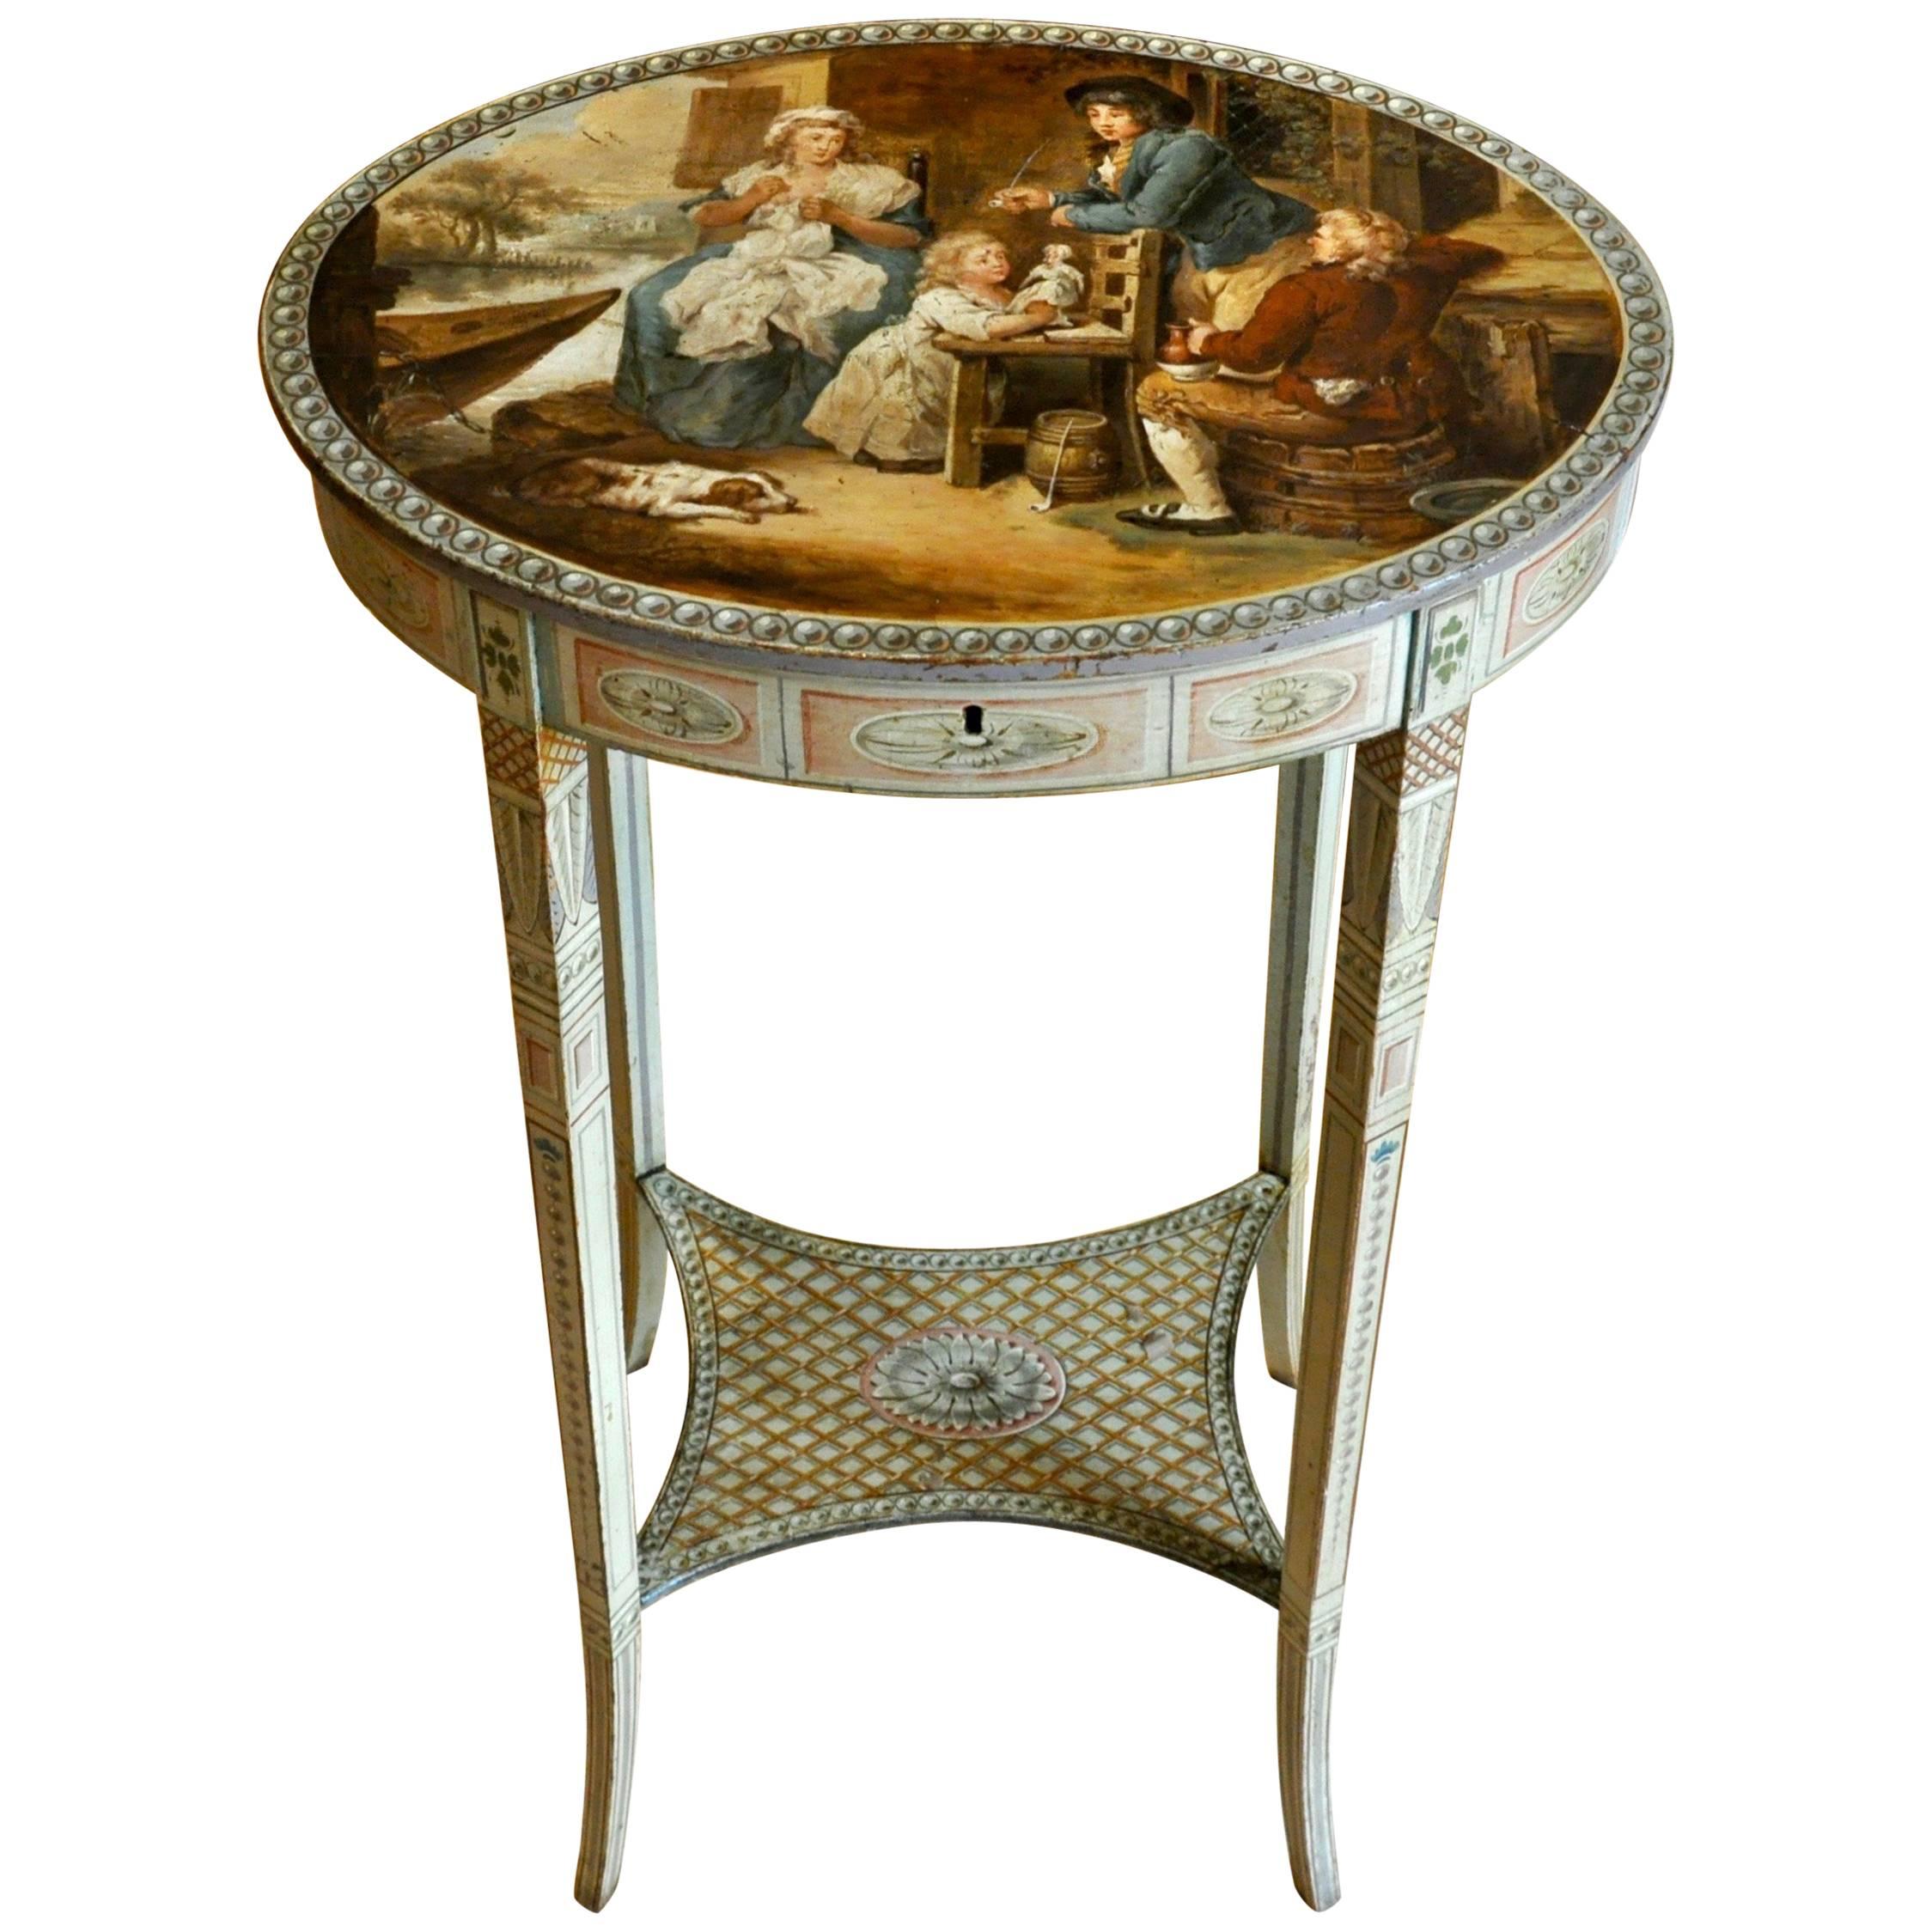 Period English Robert Adam Painted Neoclassical Work Table, circa 1770 For Sale